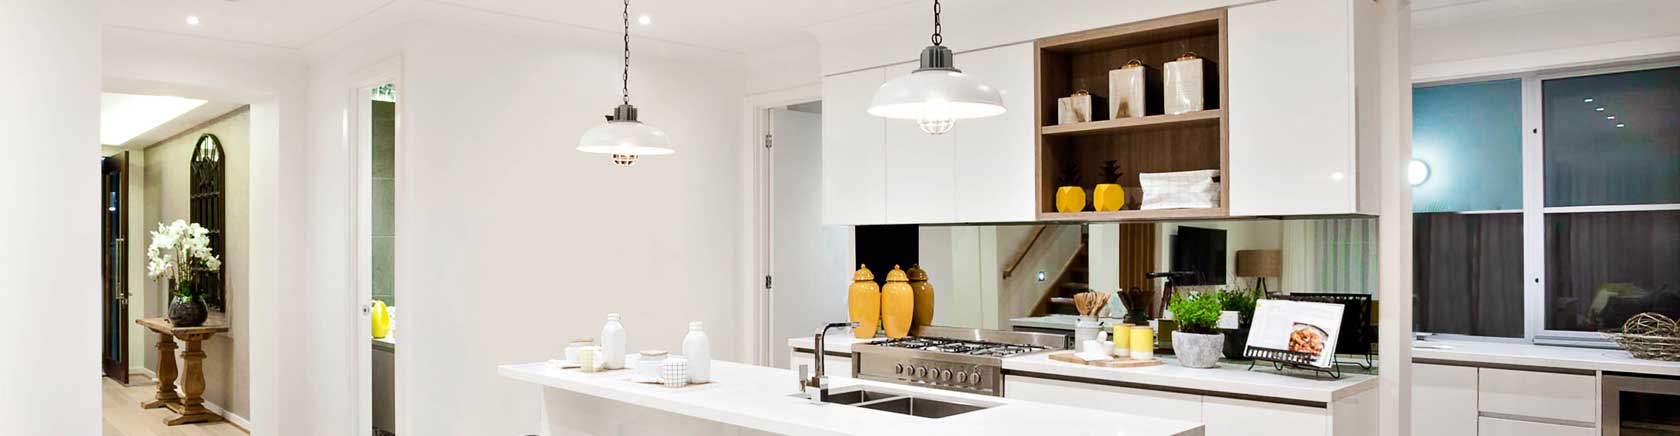 Electrical lighting and appliances in a kitchen